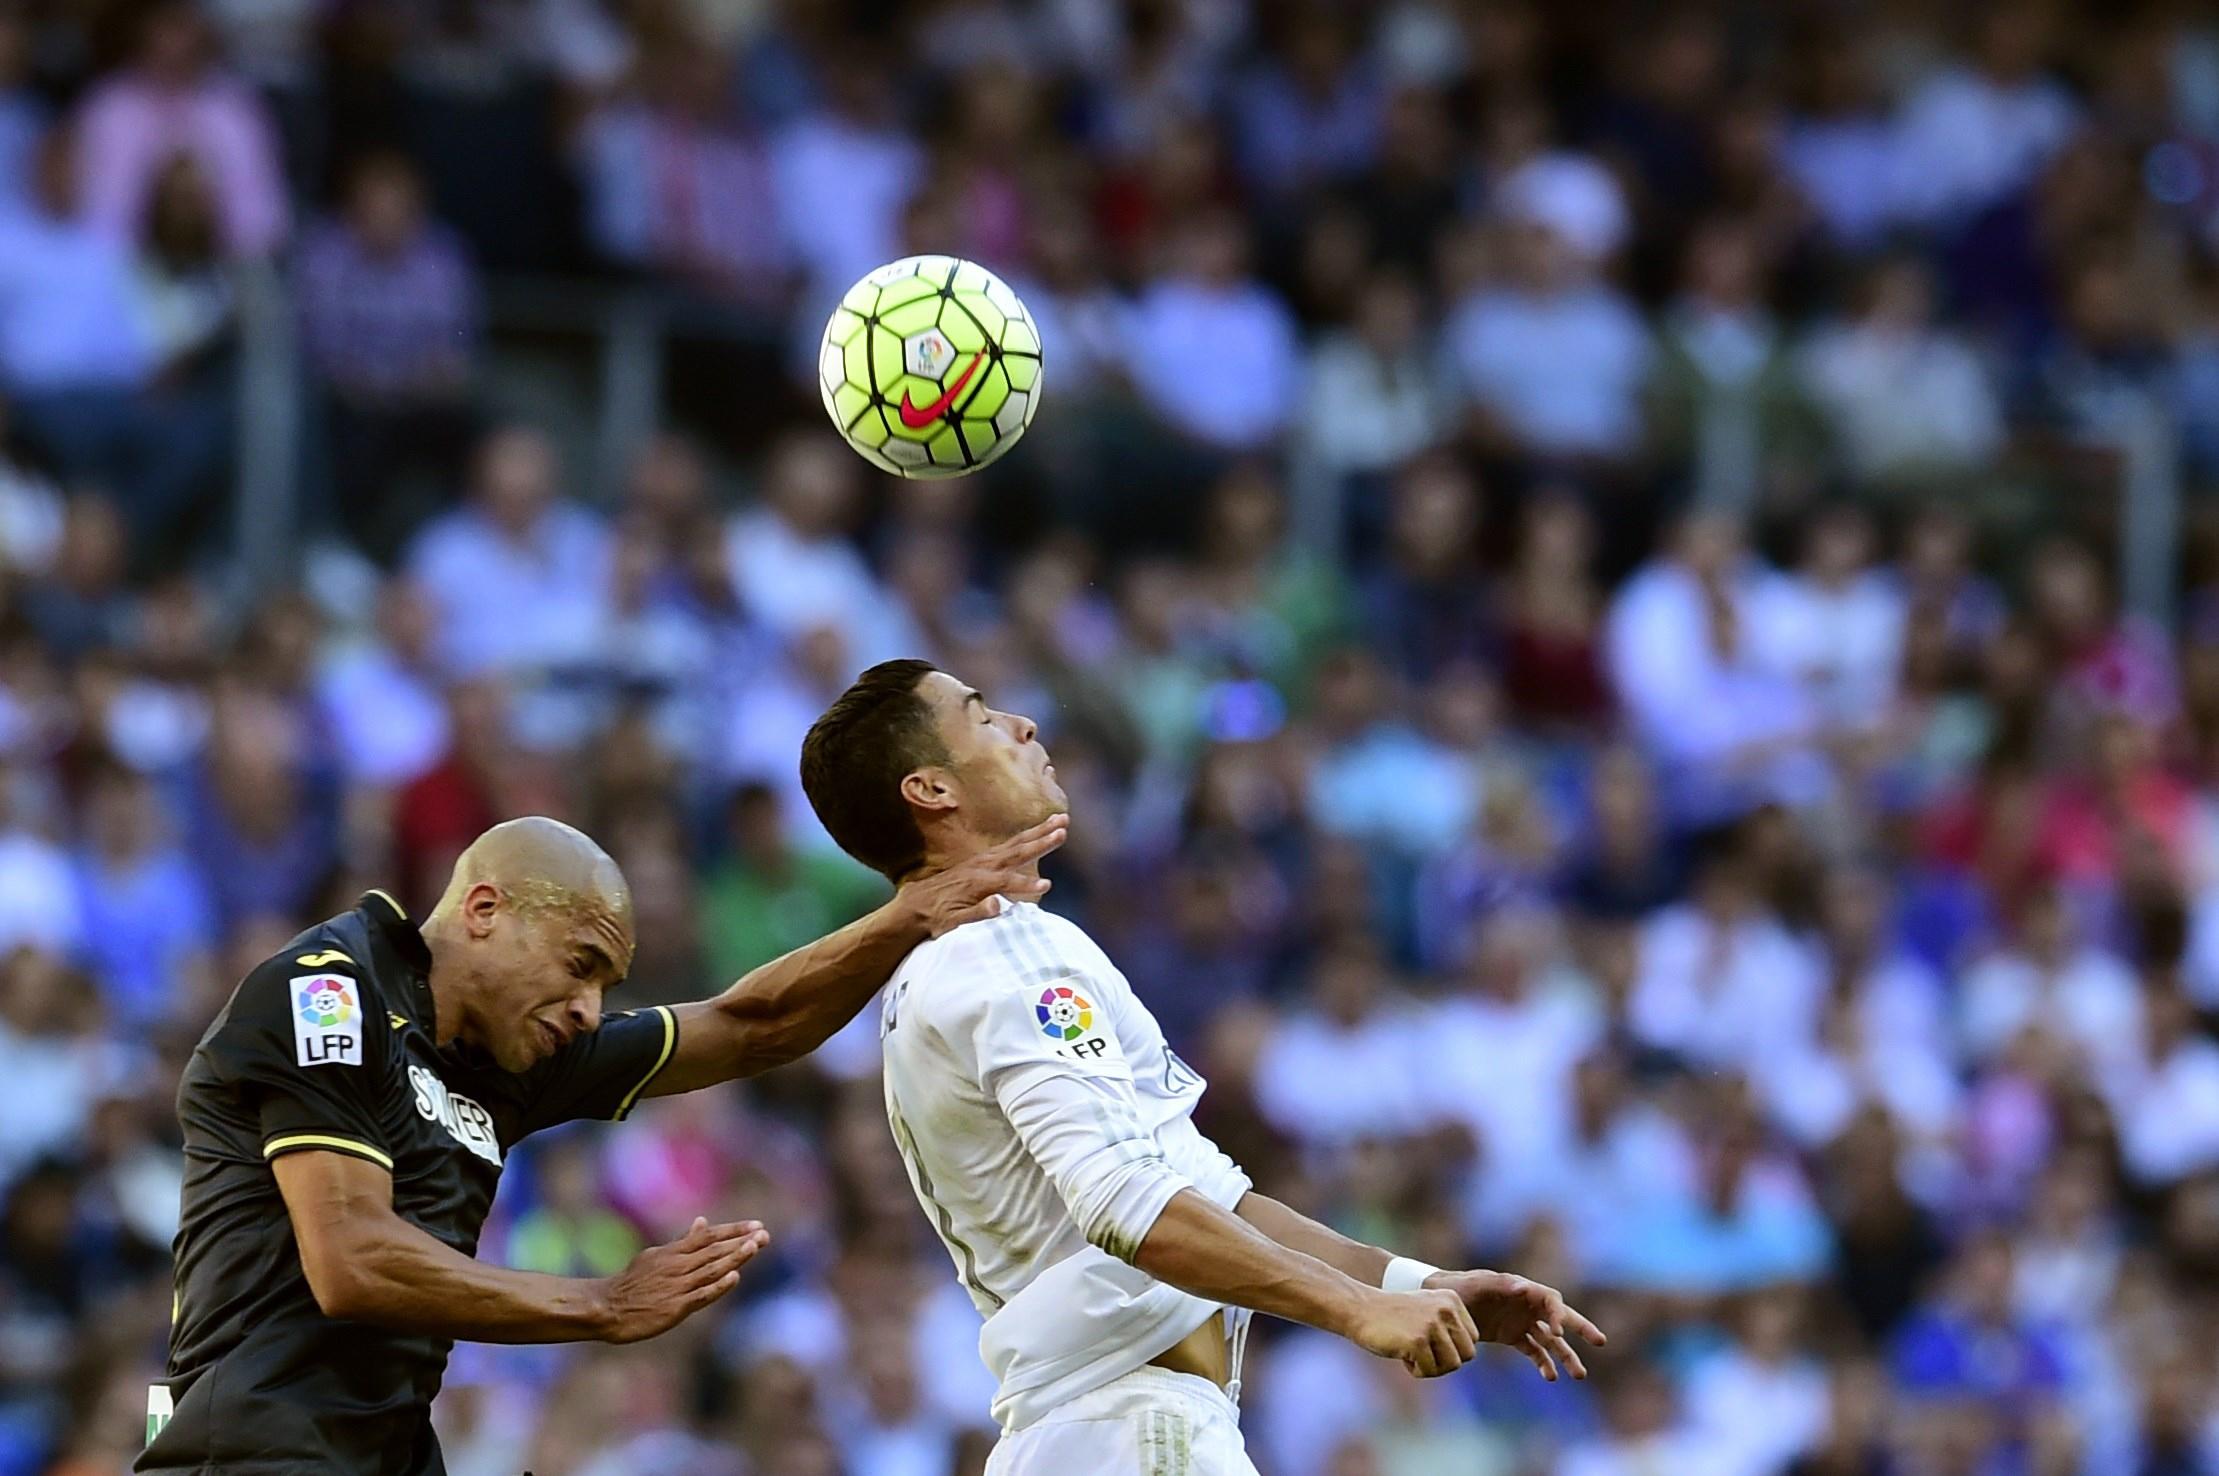 Real Madrid's Portuguese forward Cristiano Ronaldo (R) vies with Granada's Brazilian defender Doria during the Spanish league football match Real Madrid CF vs Granada FC at the Santiago Bernabeu stadium in Madrid on Spetember 19, 2015. AFP PHOTO/ JAVIER SORIANO (Photo credit should read JAVIER SORIANO/AFP/Getty Images)